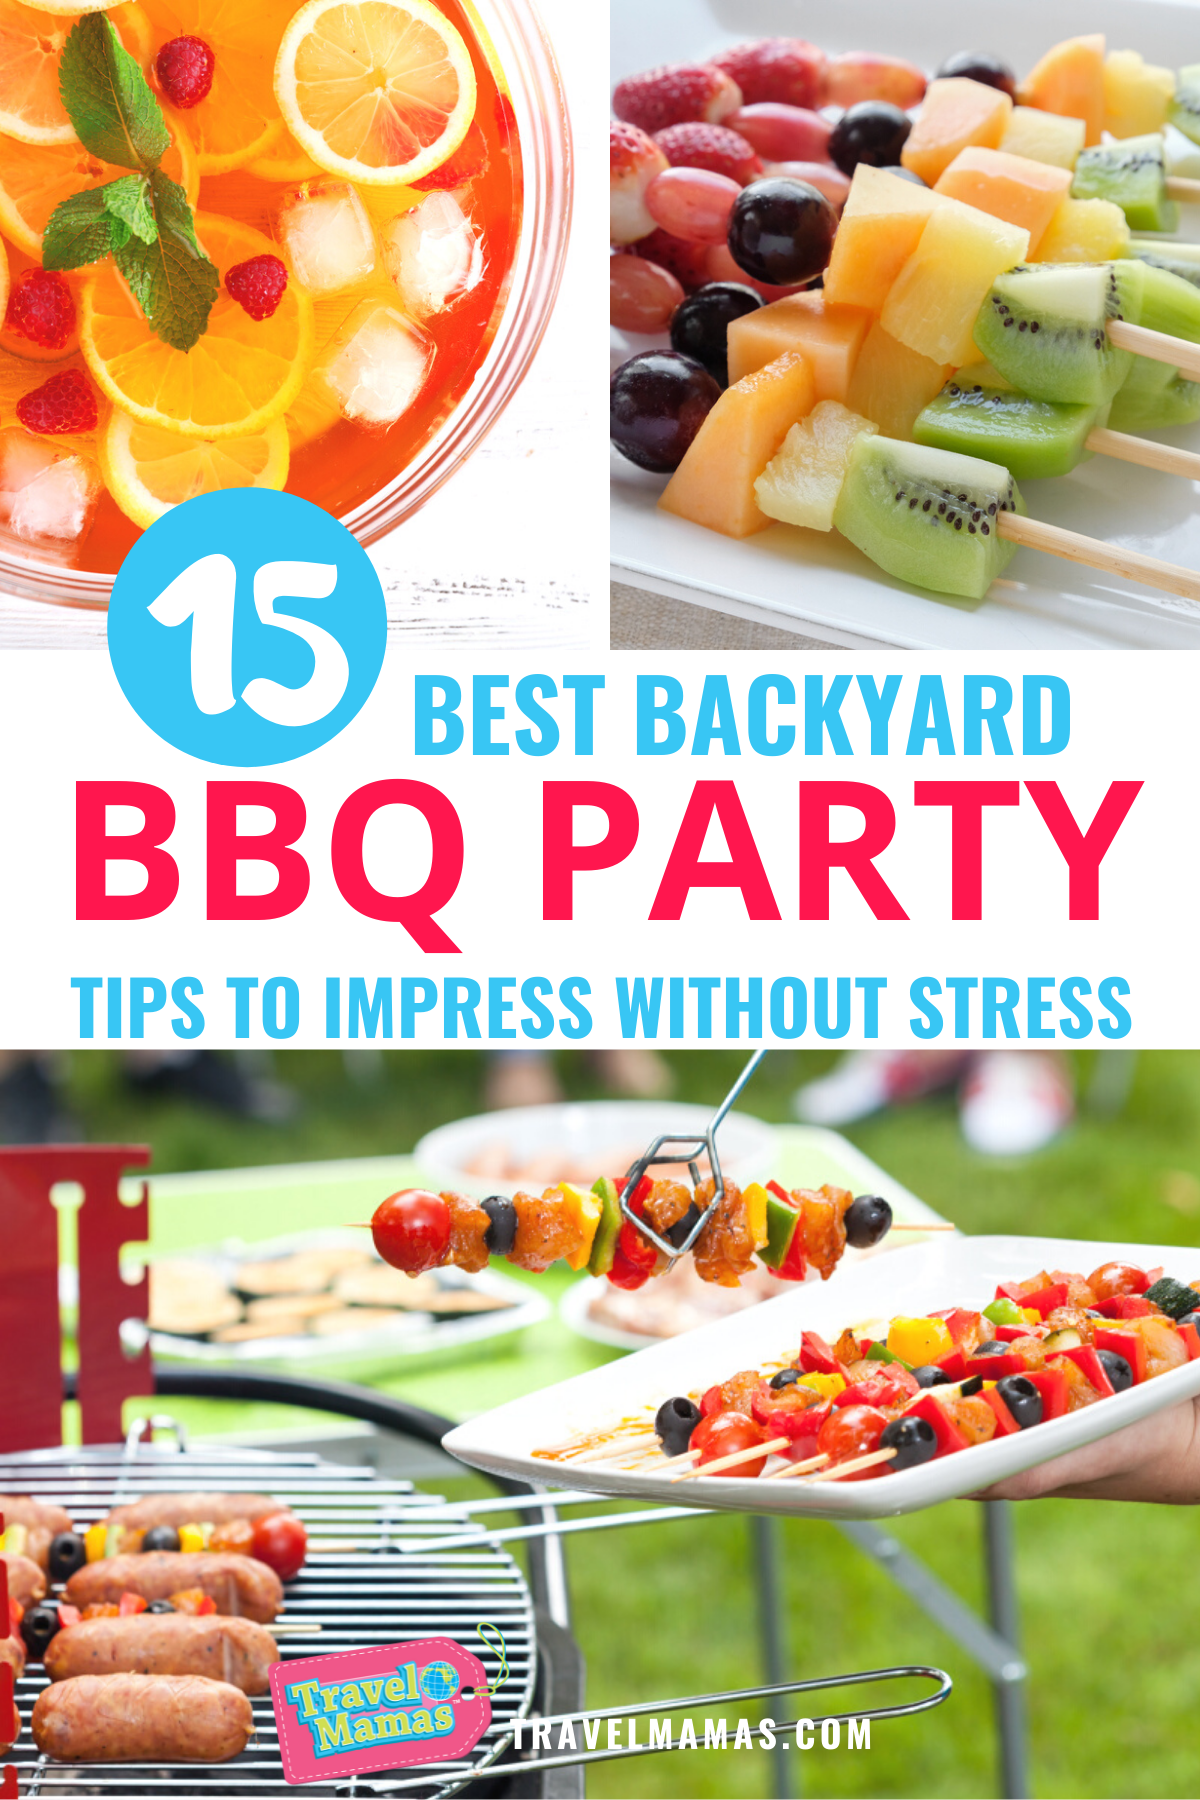 Best Backyard BBQ Party Ideas and Tips